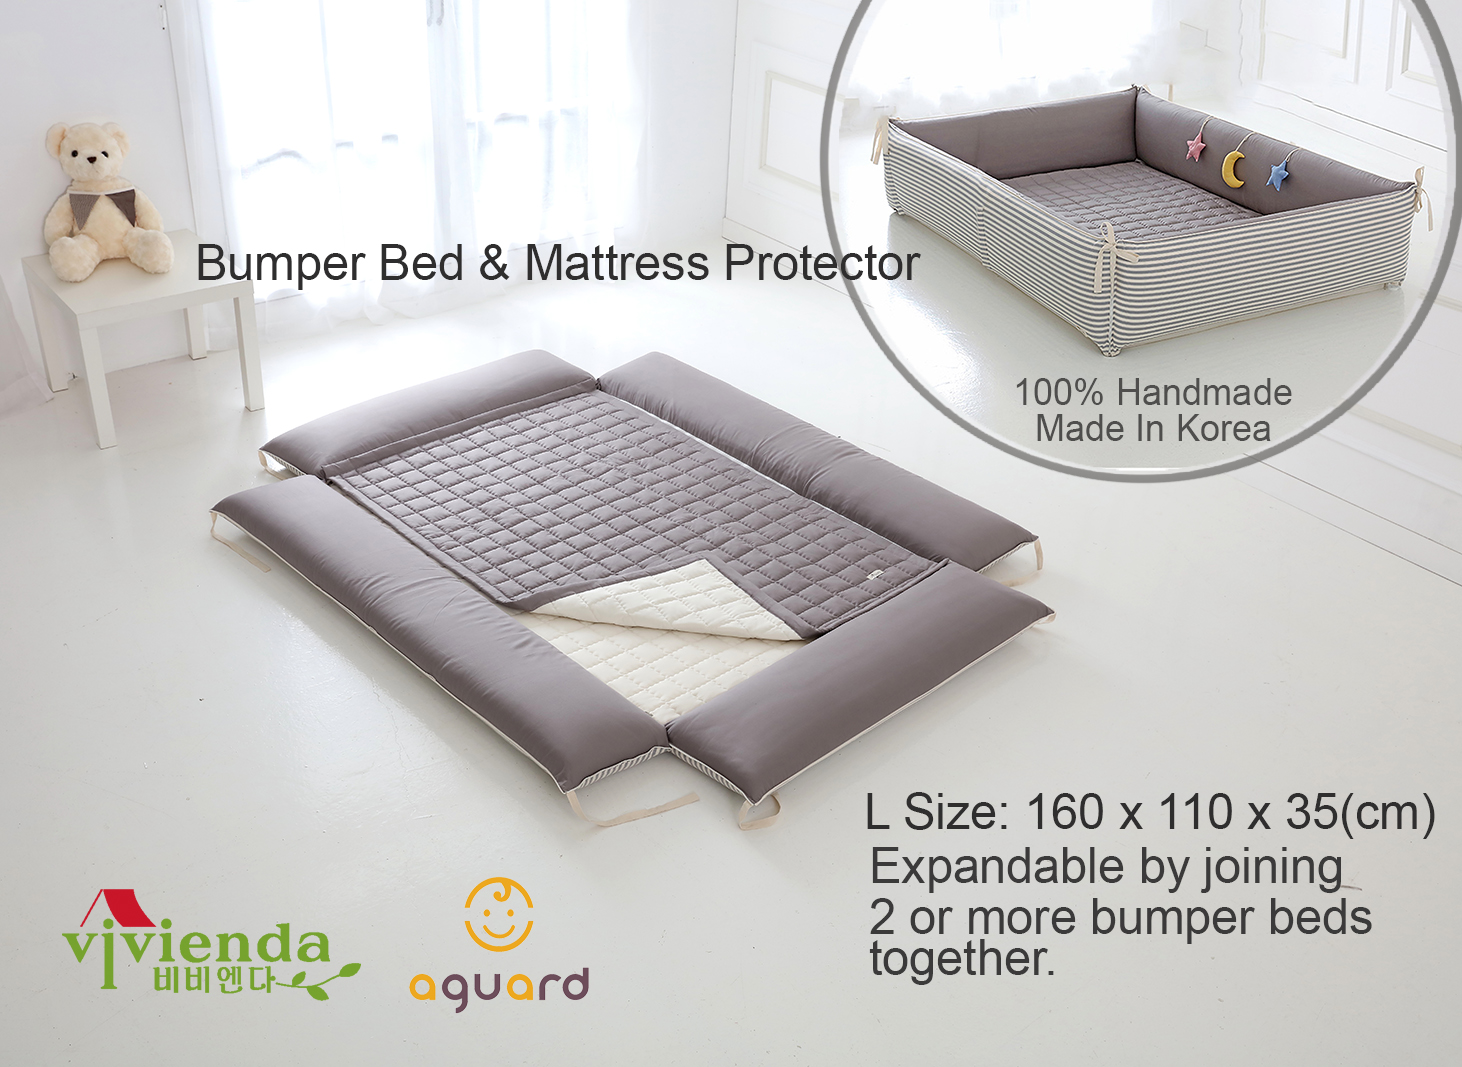 AGUARD Bumper Bed - Size L with Mattress Protector